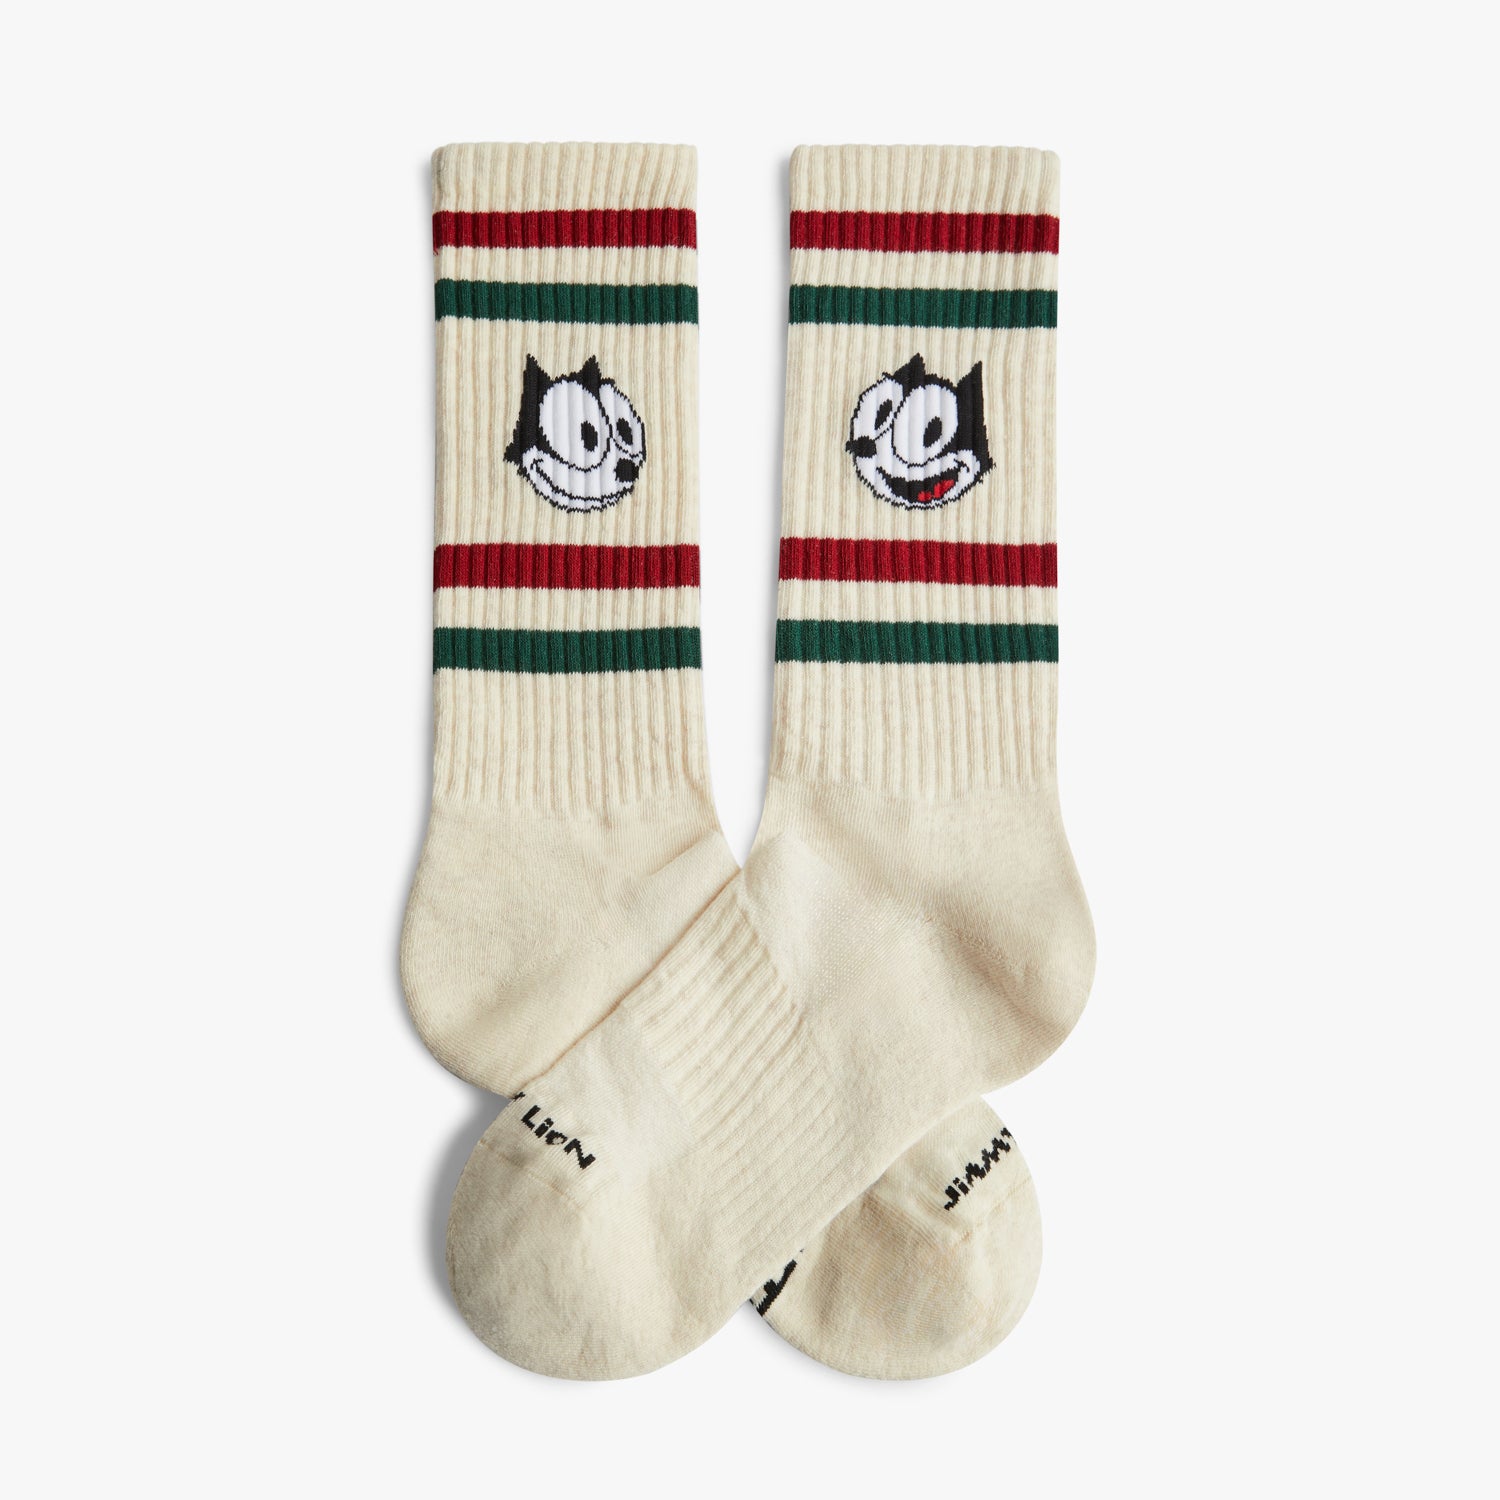 Jimmy Lion - We could stare into these socks all. day. long. #MexicoLindo  #JimmyLion